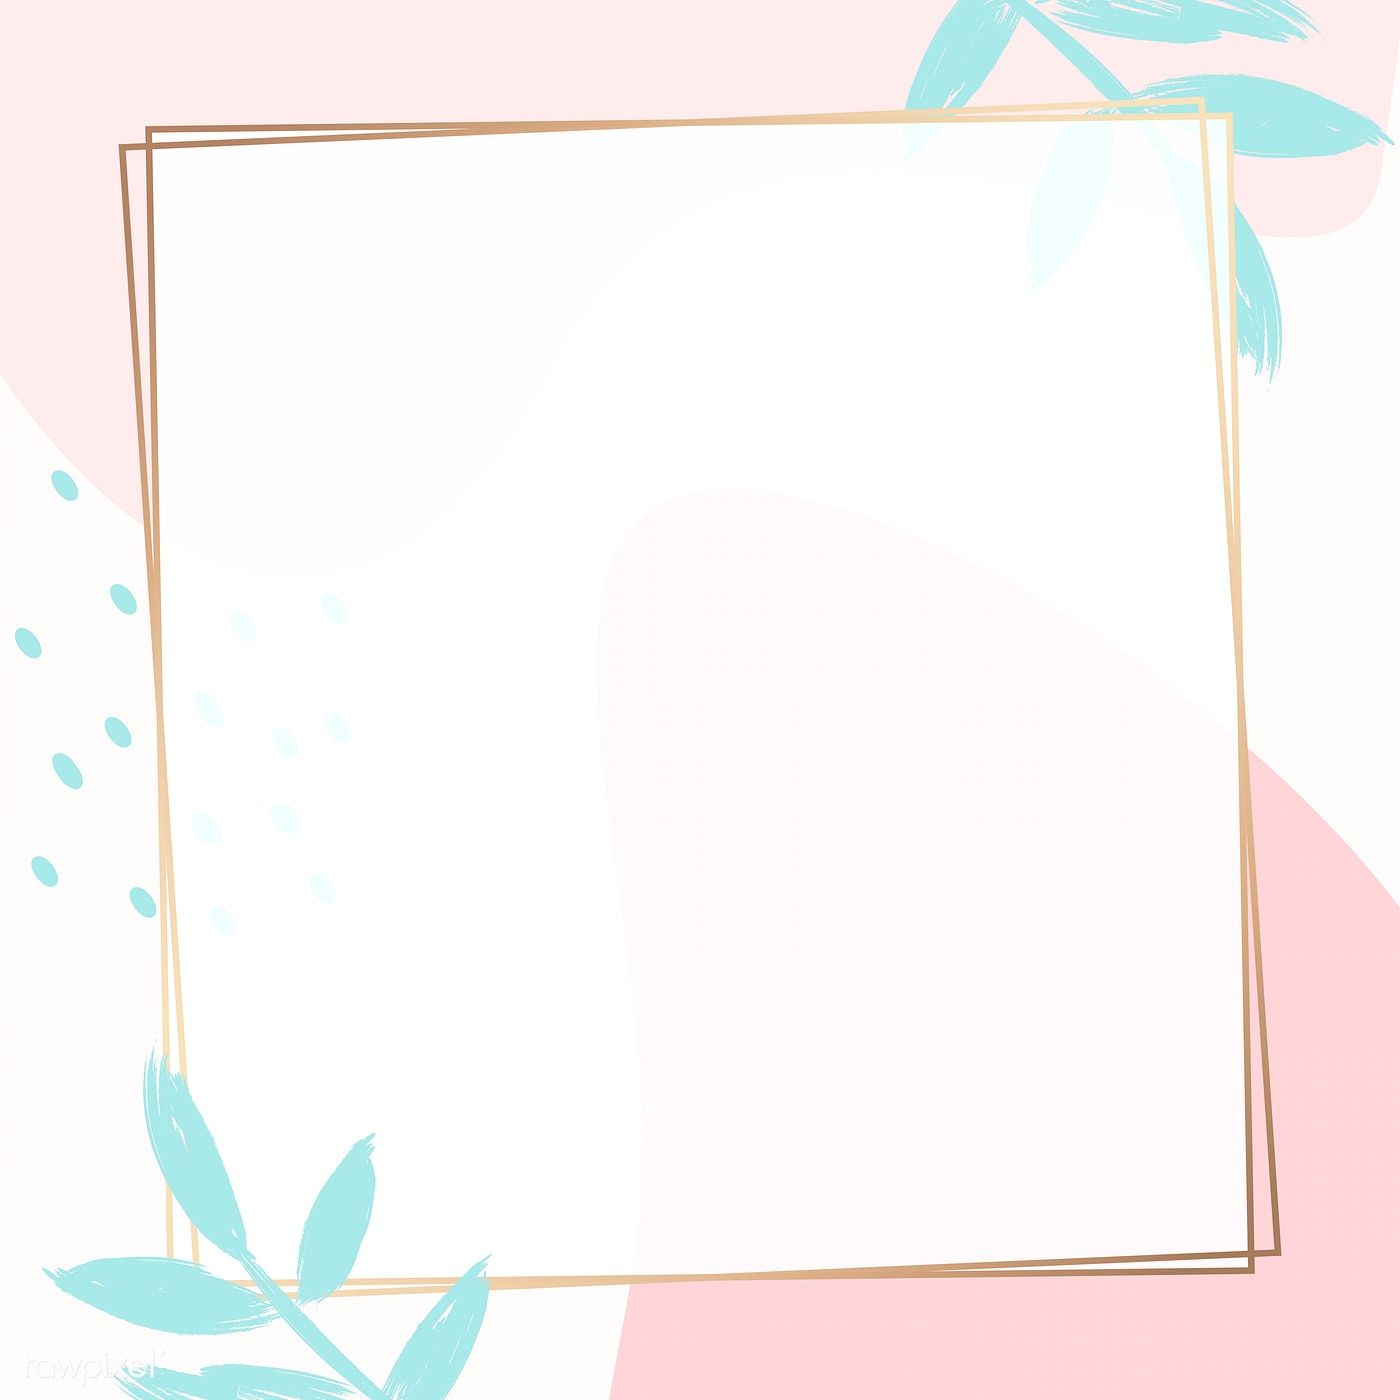 Premium Vector Of Square Golden Frame On A Colorful